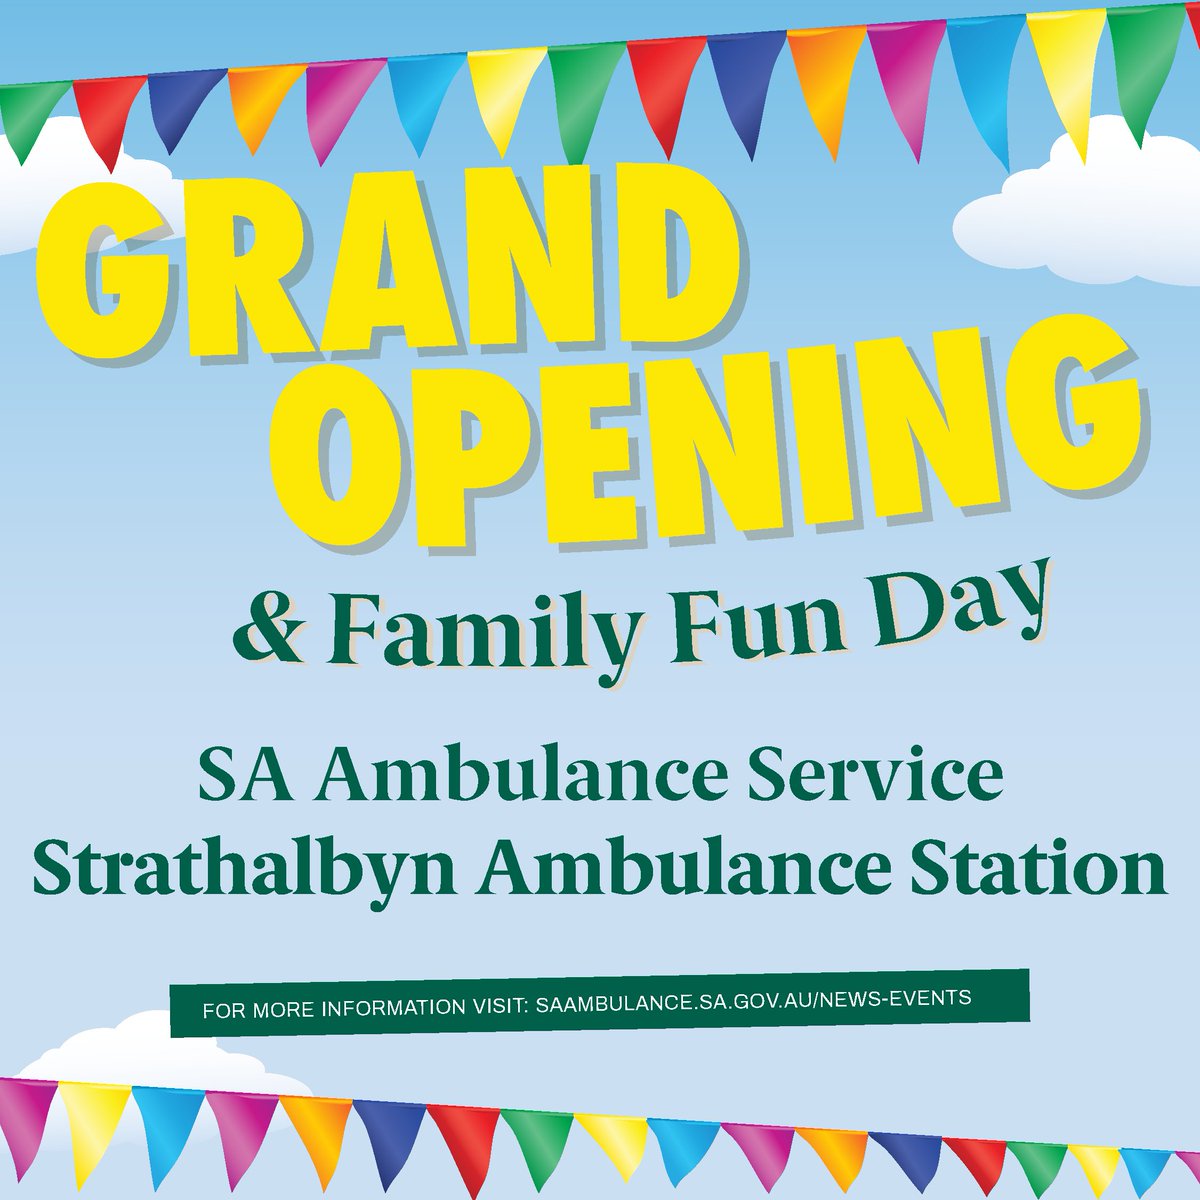 📣Reminder: THIS SUNDAY is the Grand Opening of our new Strathalbyn Ambulance Station! Join us this Sunday, 5 February for coffee & cake, sausage sizzle, face painting or a go on the bouncy castle🎪You can also meet our crew & check out vintage ambulances! facebook.com/events/7300954…